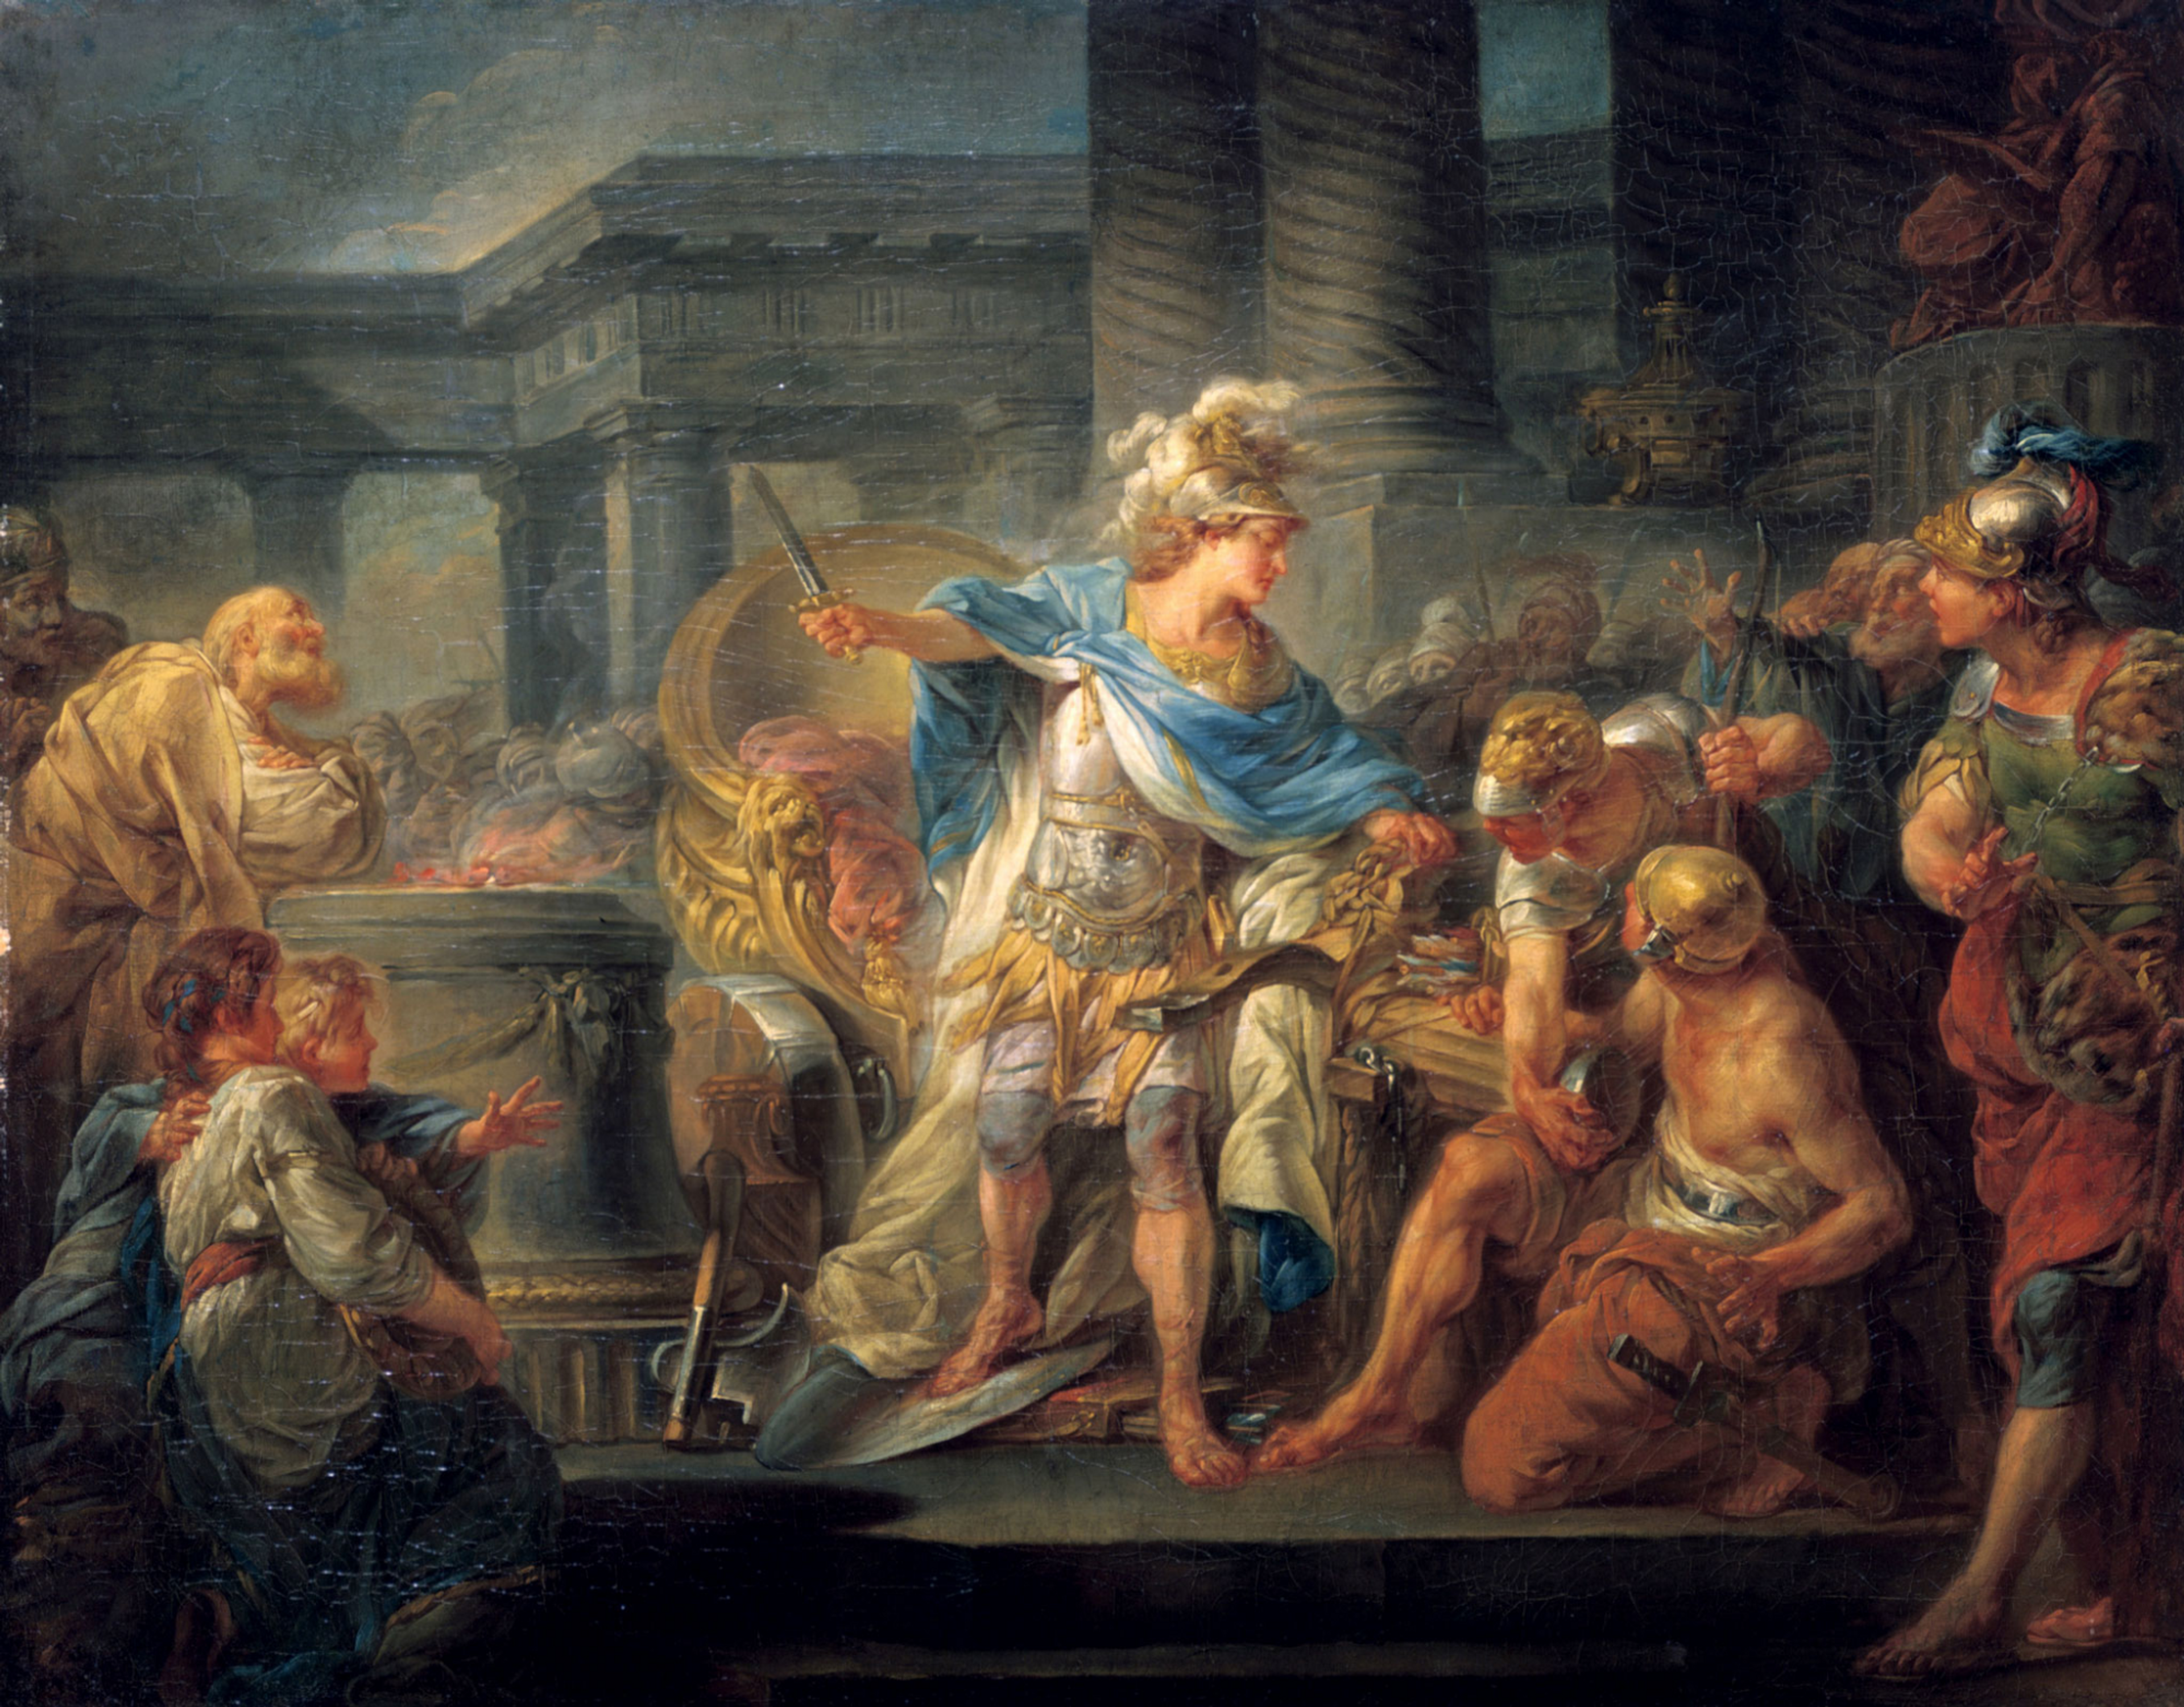 Alexander the Great in Phrygia cutting the Gordian knot